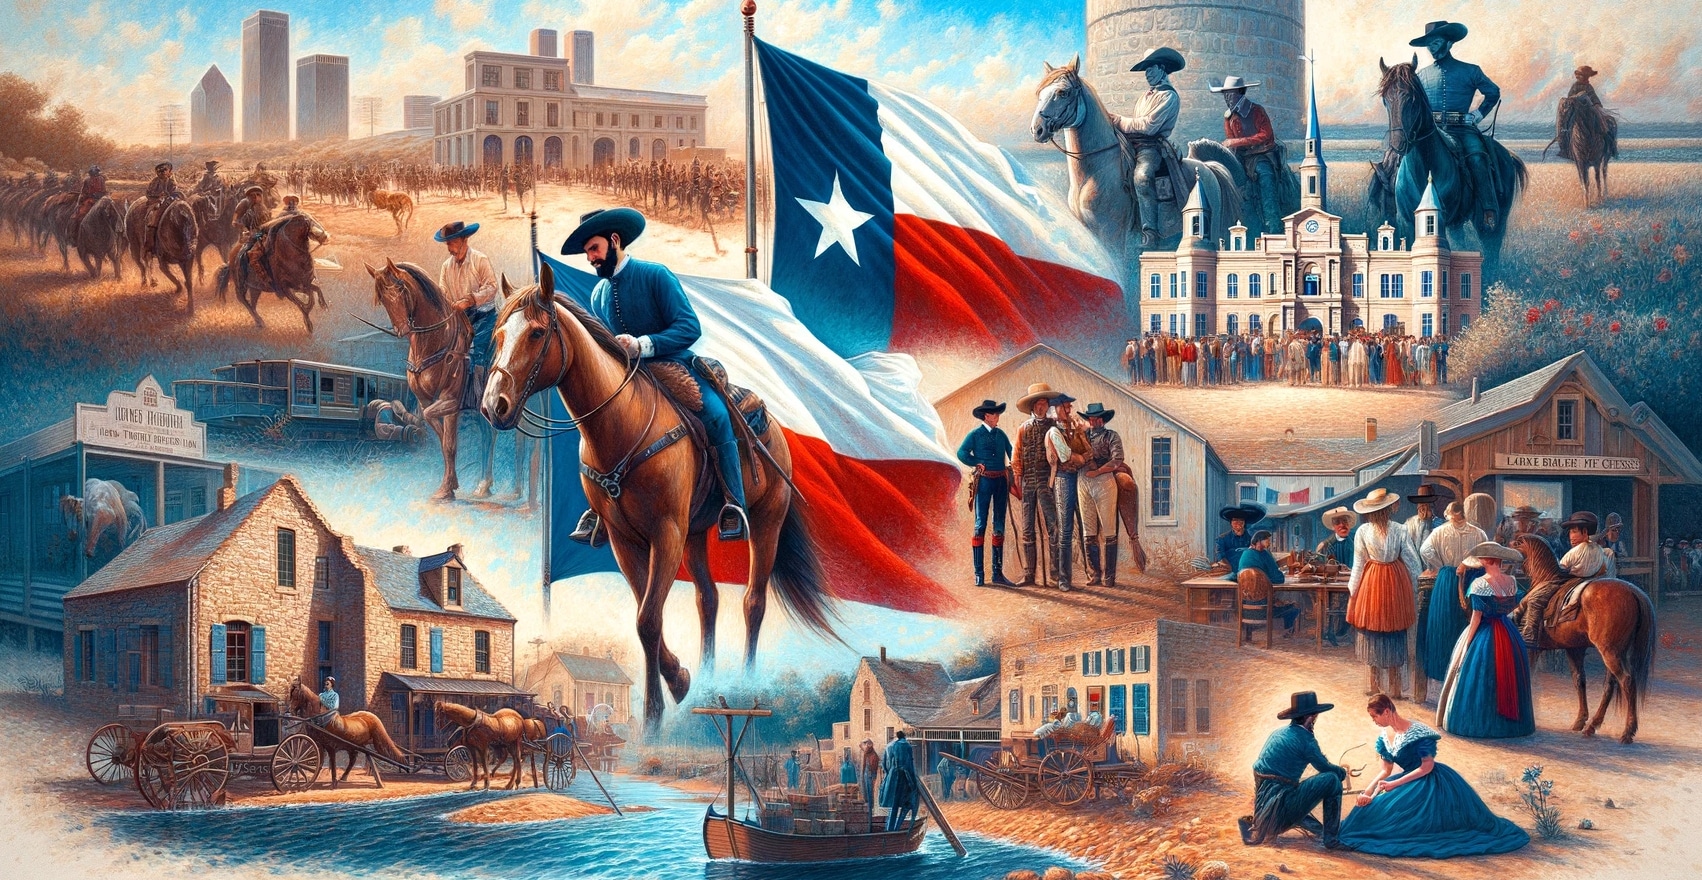 This photo realistically illustrates the pivotal moments in the Franco-Texan history, focusing on the 17th-century French exploration led by Robert Cavelier de La Salle. His 1685 expedition culminates with the establishment of Fort Saint Louis, signifying the dawn of French influence in Texas.